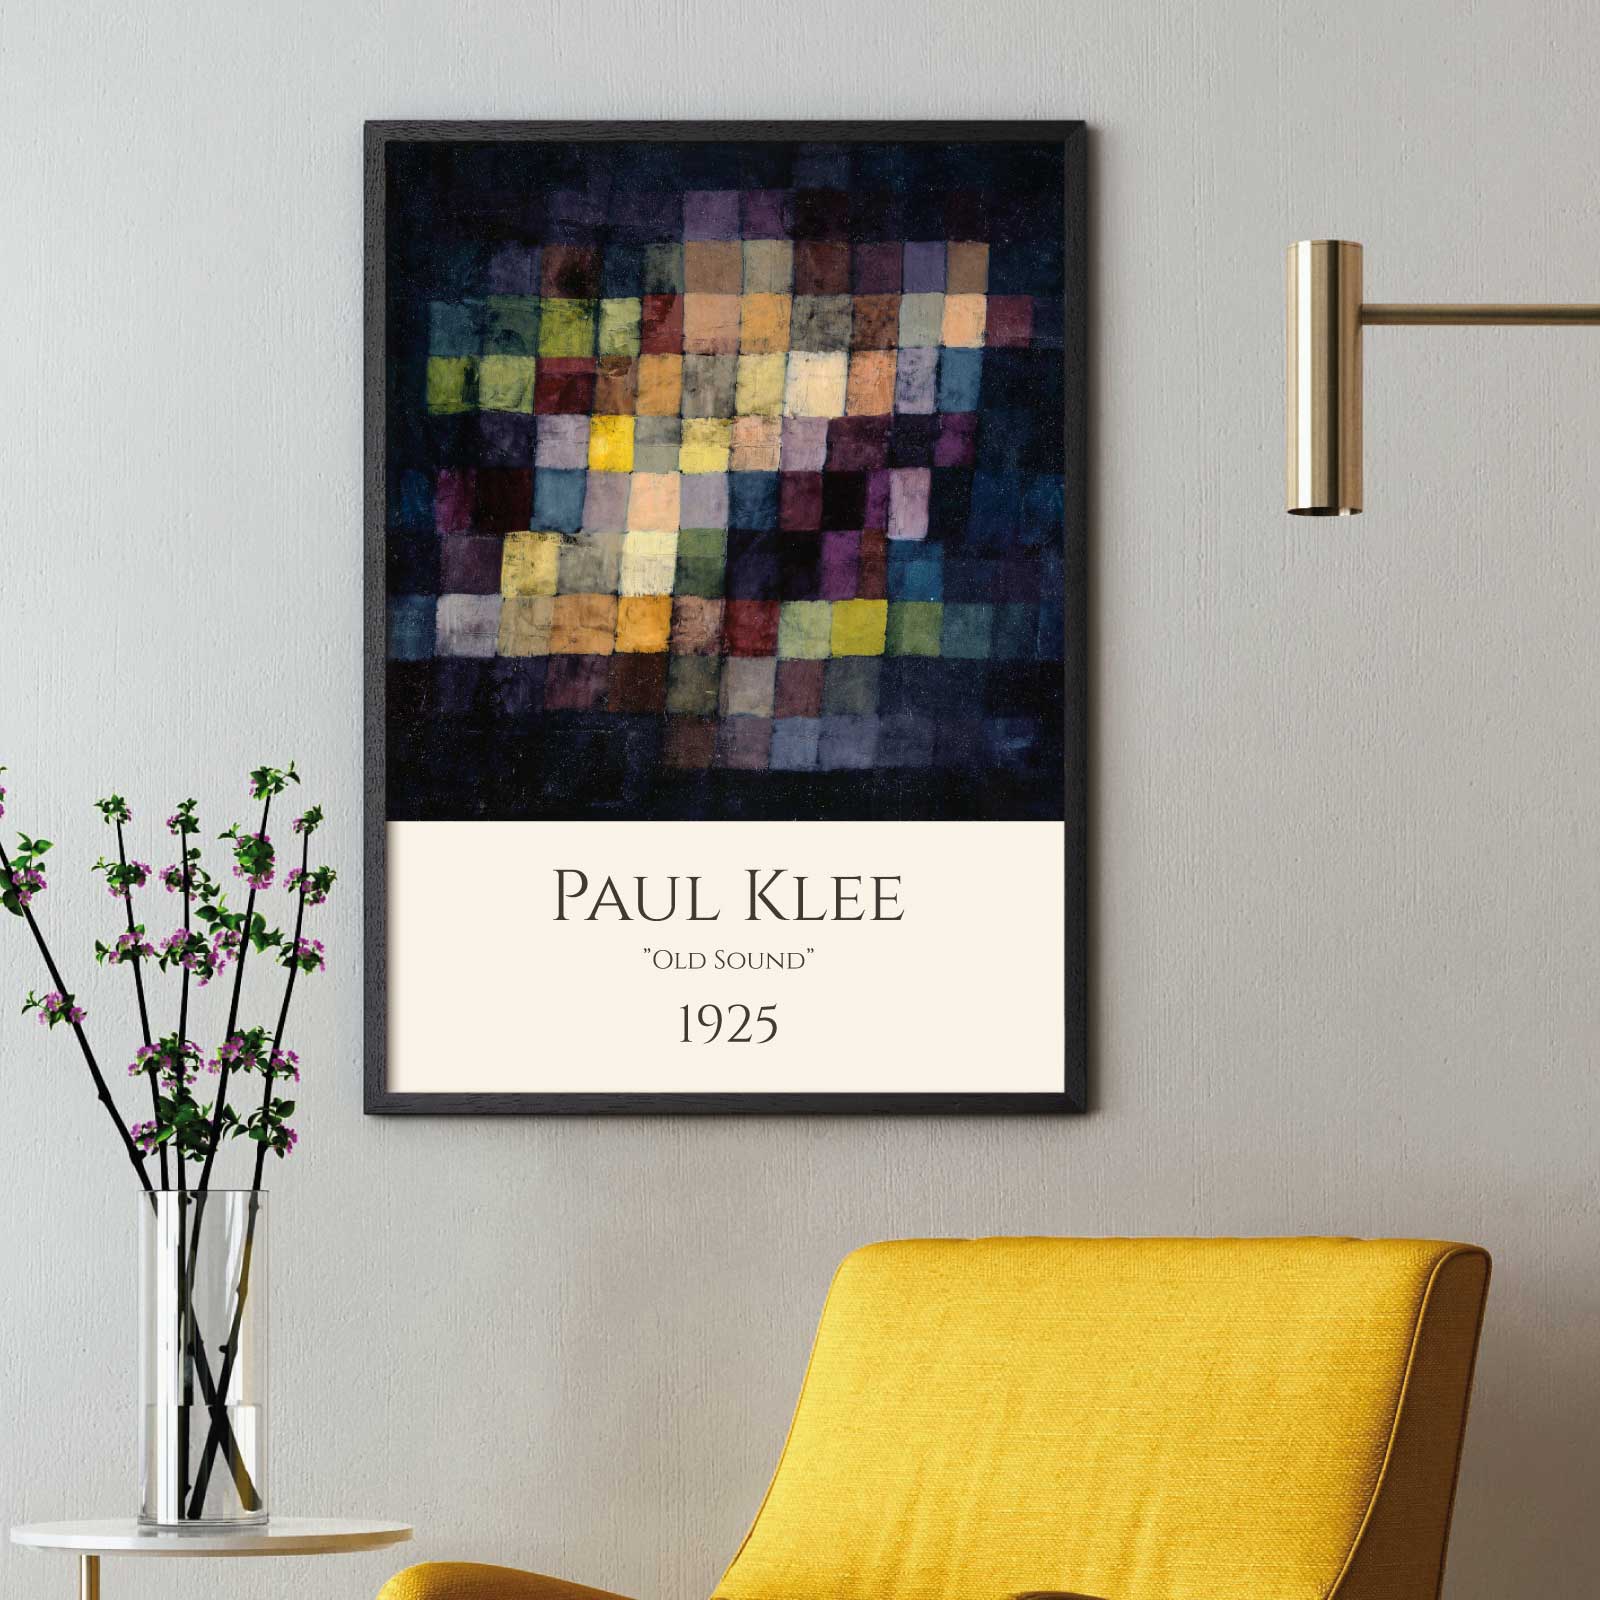 Art poster with Paul Klee painting "Old Sound"